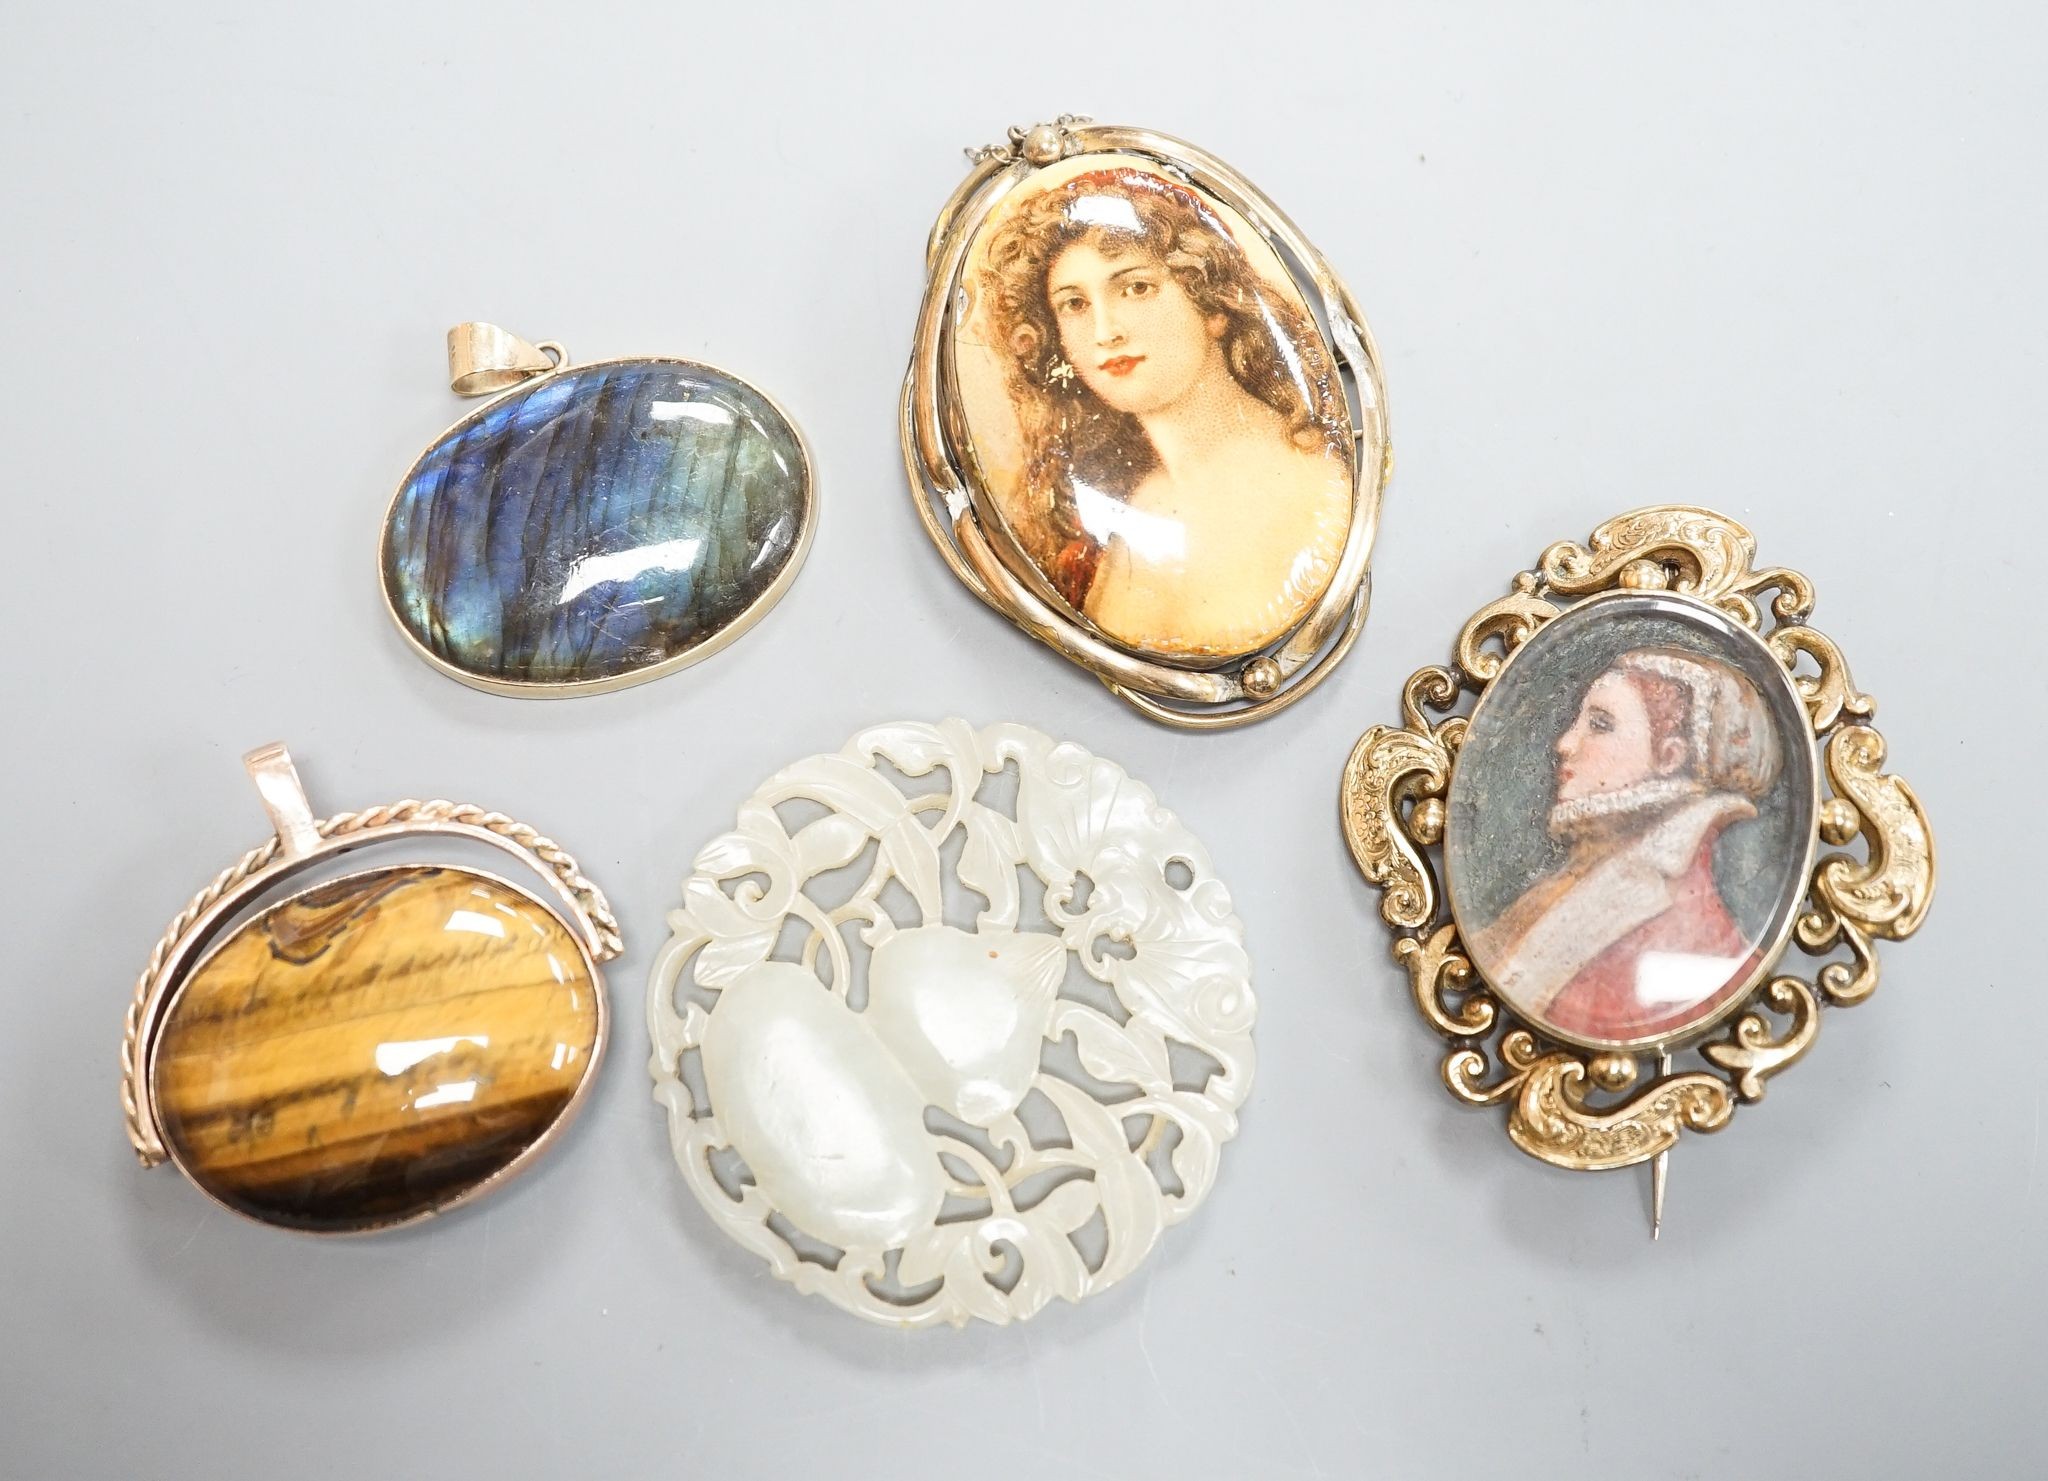 A 19th century gilt metal mounted brooch, with inset oval painted wax bust of a lady to dexter, 60mm and four other items including a 9ct mounted oval tiger's eye quartz pendant.